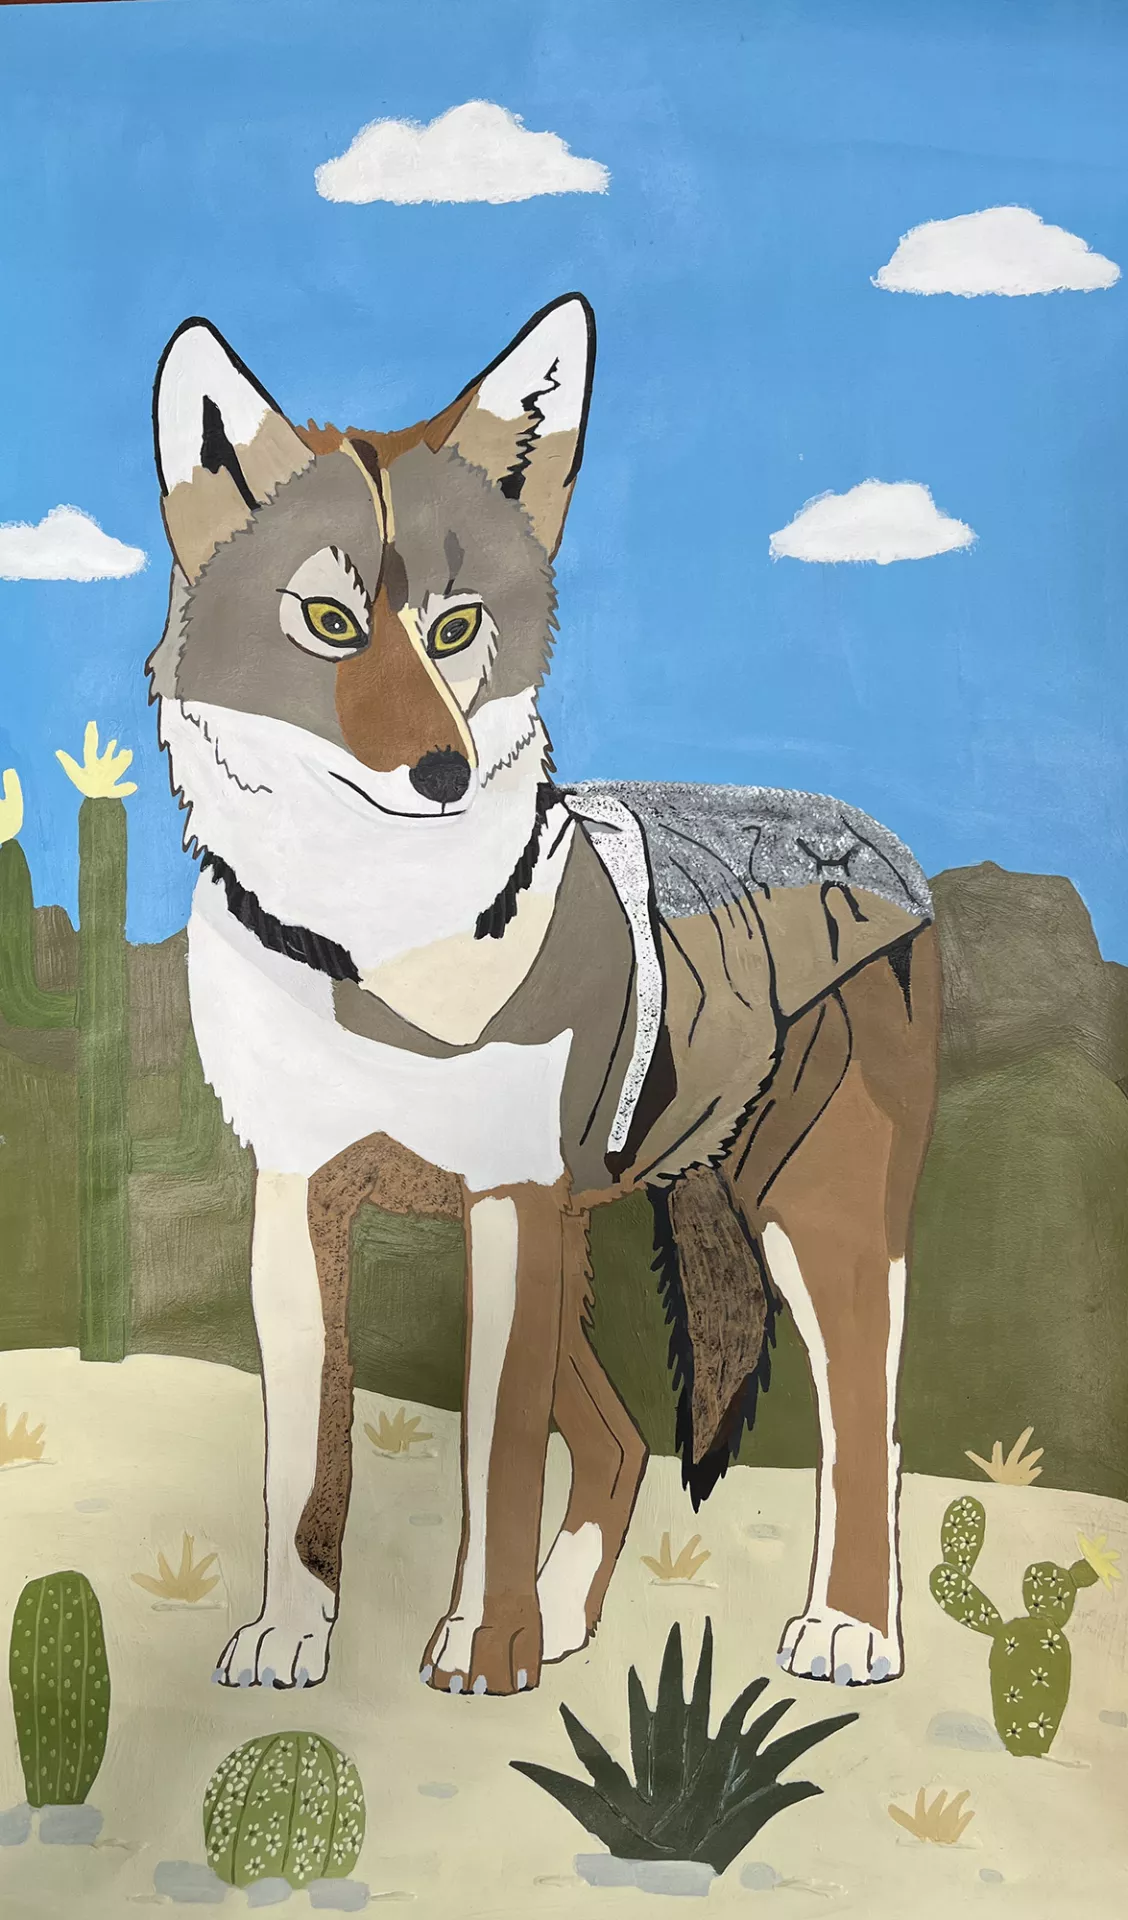 Ariana Sanchez Coyote, 2022 In this painting a coyote stands in a desert environment. The coyote is painted in browns and grays with crisp patches of various tones and textures. There are cacti around and behind the animal. The coyote faces us, its expression calm, its eyes pronounced. In the background is a blue cloudy sky.  Acrylic on paper, 18” x 12”